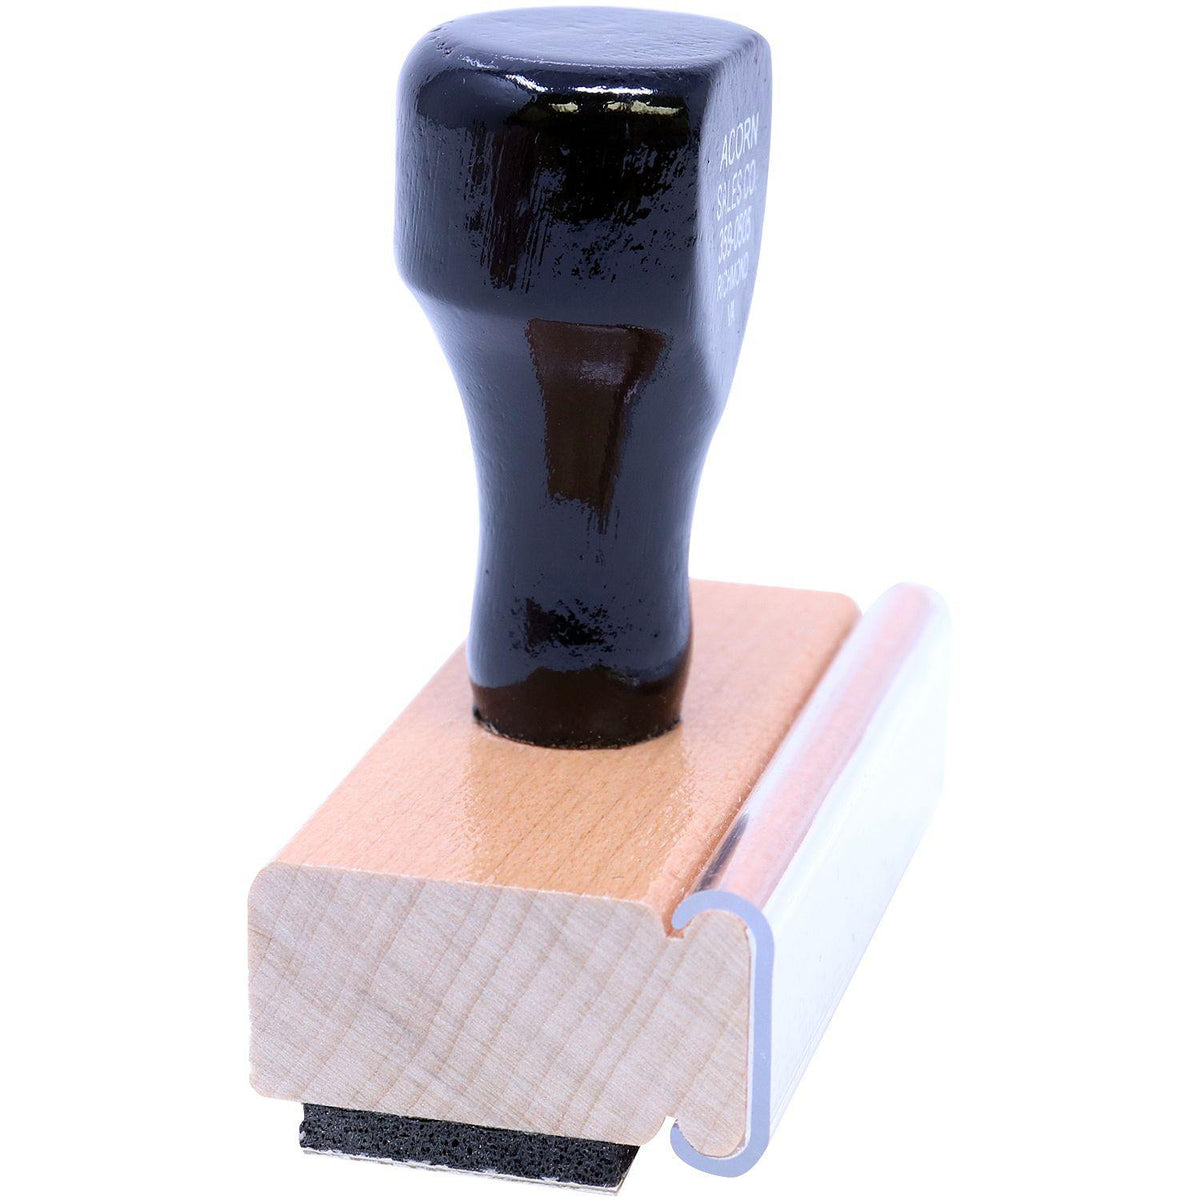 Side View of Bold Copy Rubber Stamp at an Angle